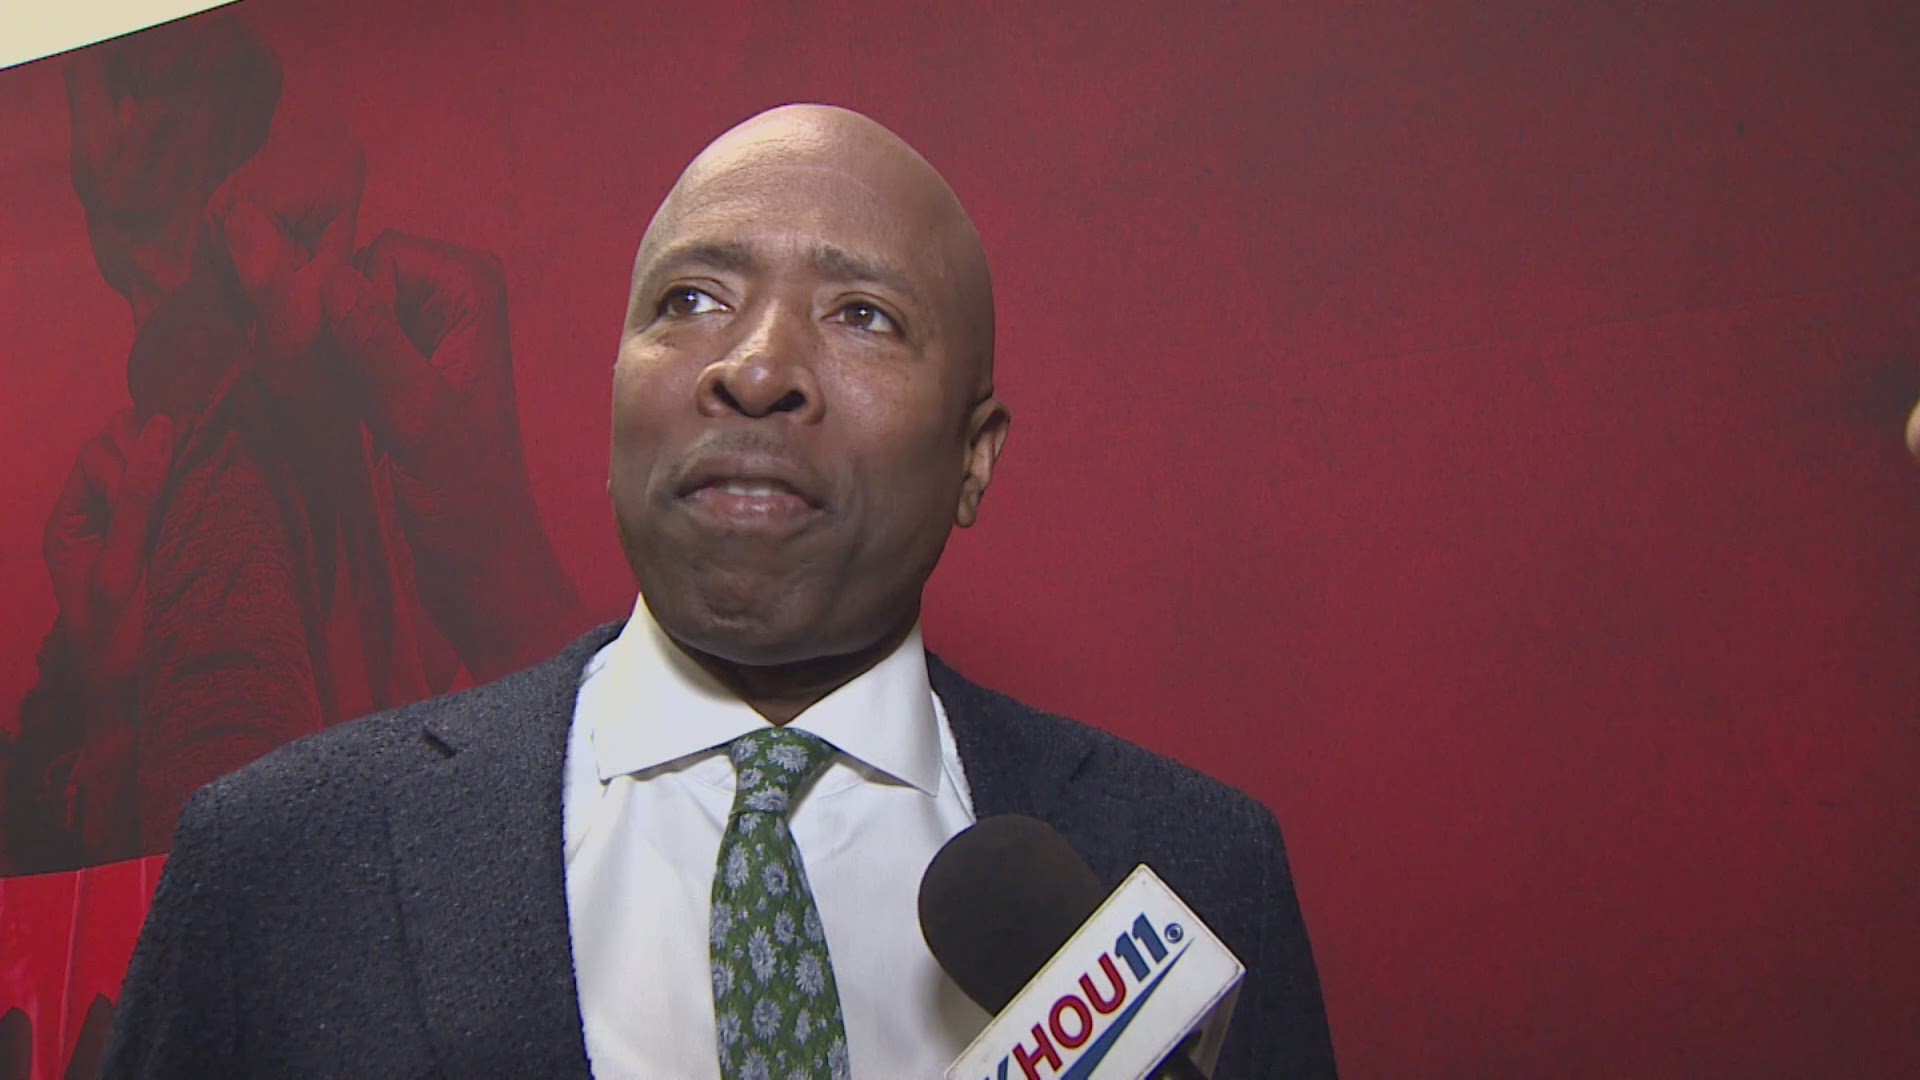 Before Game 2, KHOU 11's Daniel Gotera goes one-on-one with former Rockets guard Kenny Smith, a member of the popular NBA on TNT team.